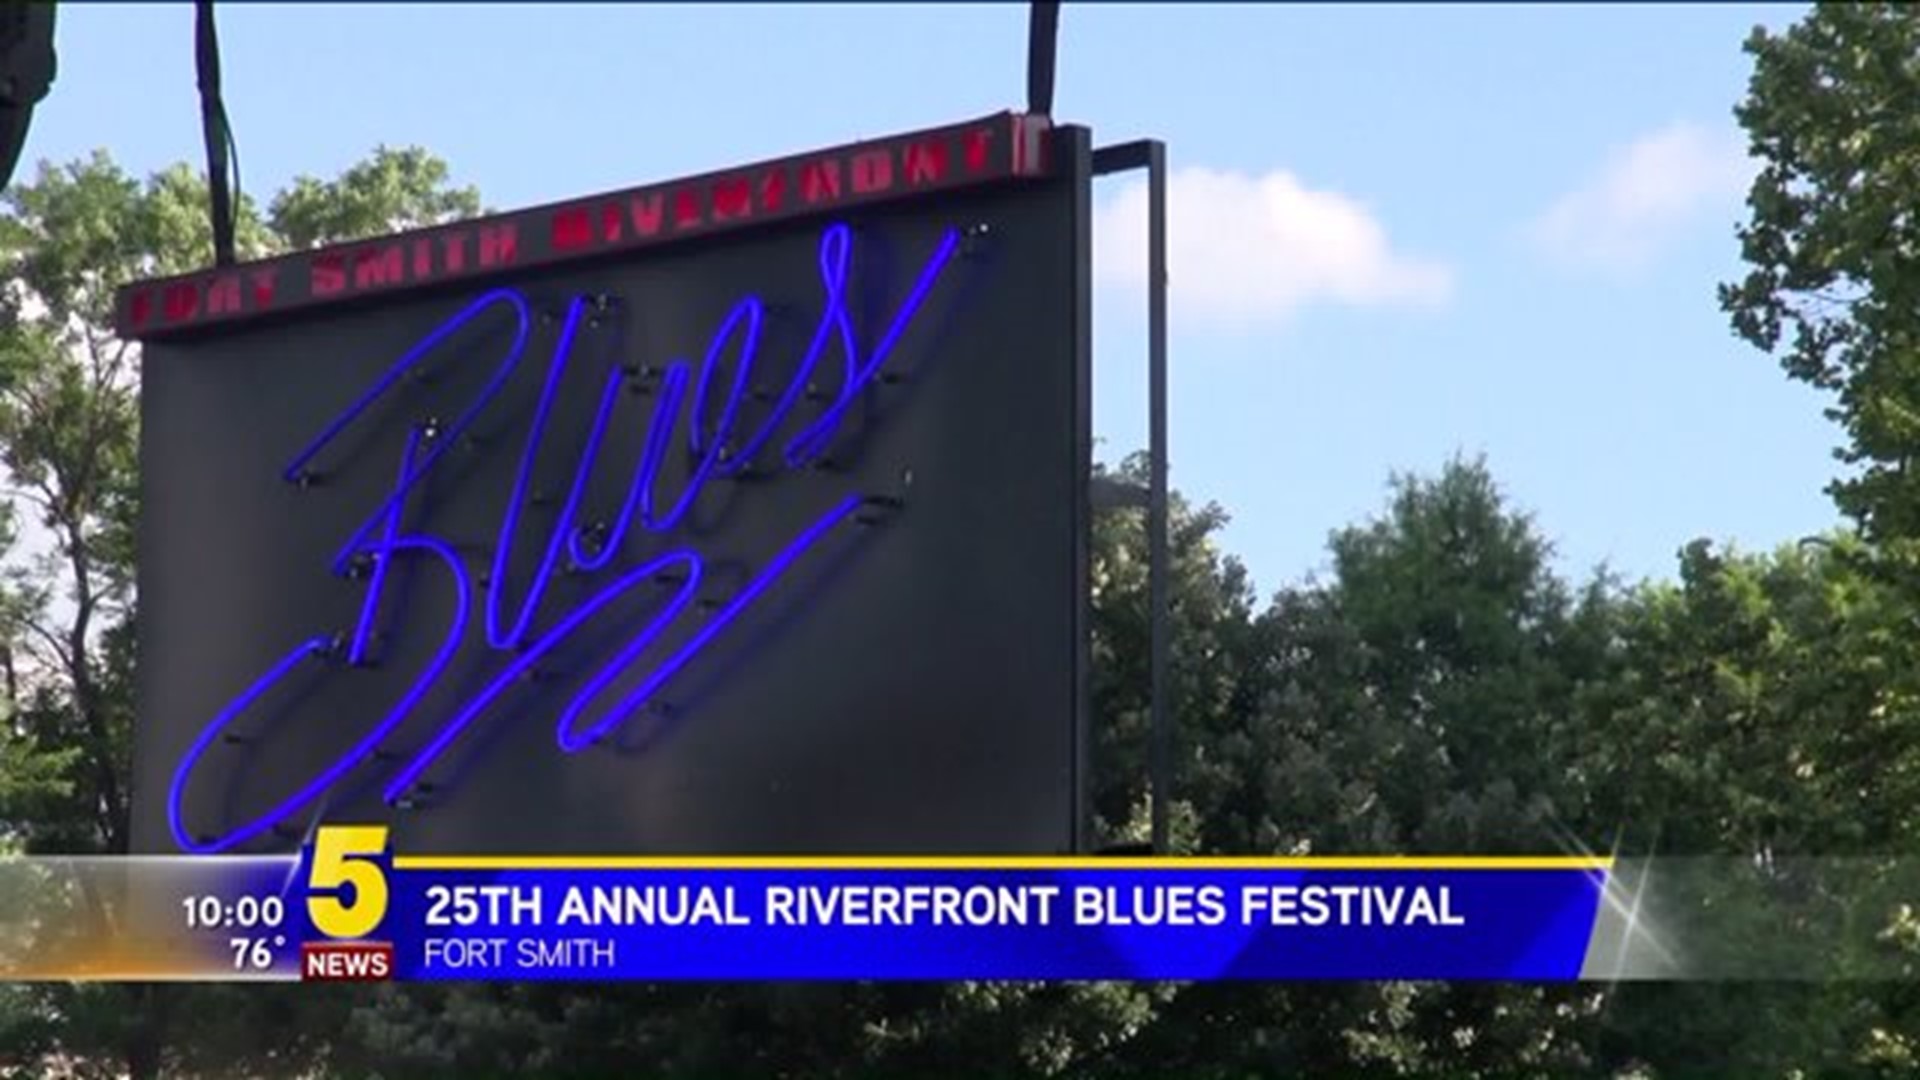 Free admission for 30th annual Riverfront Blues Festival